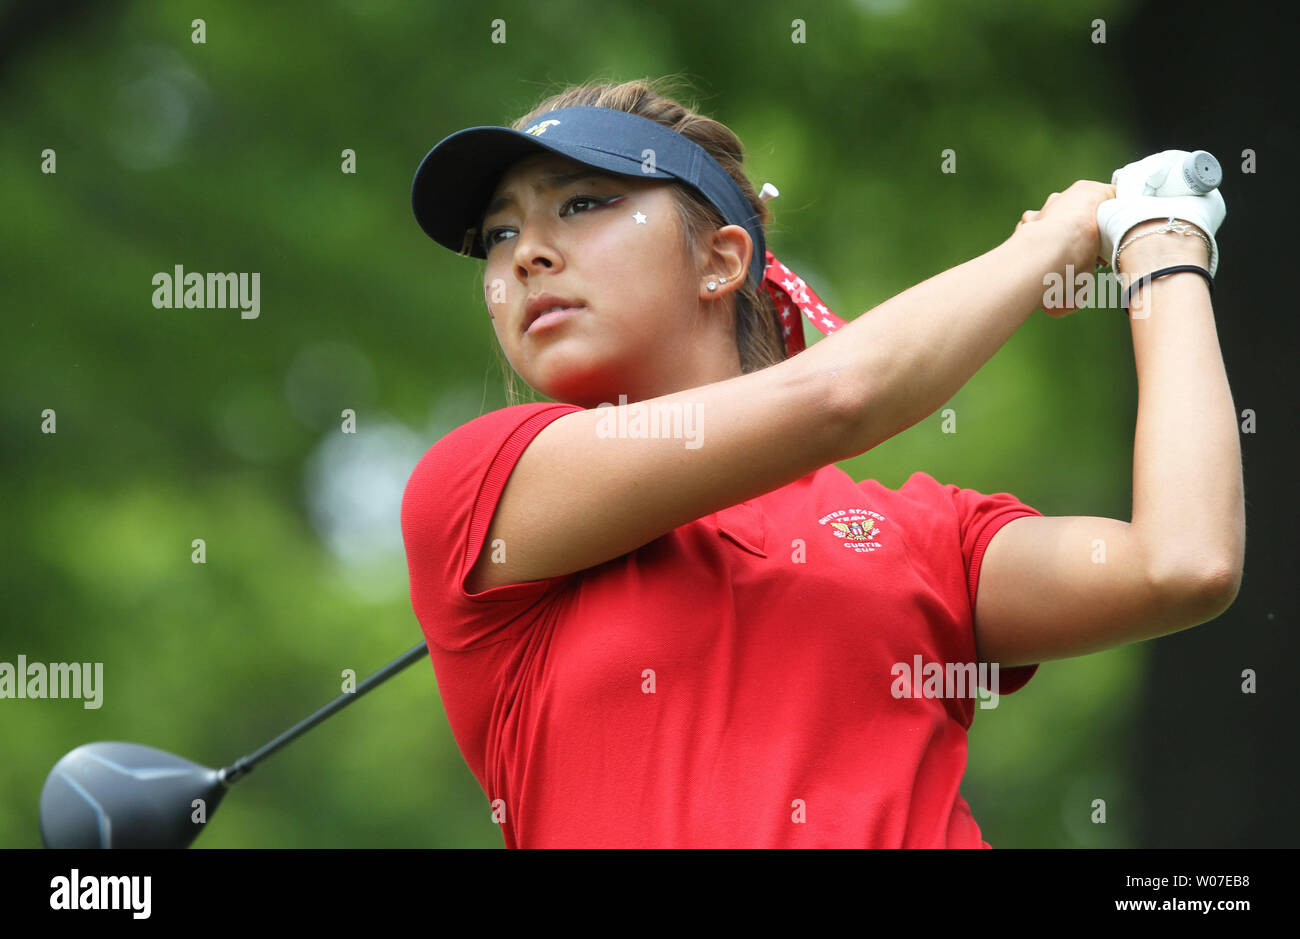 USA team member Alison Lee of Valencia, California takes her opening tee shot during the afternoon session of the 38th Curtis Cup match at St. Louis Country Club in Ladue, Missouri on June 6, 2014. The Curtis Cup Match is played by women amateur golfers, one team from the United States of America and one team representing England, Ireland, Northern Ireland,Scotland and Wales. The team consist of eight players and a captain     UPI/Bill Greenblatt Stock Photo